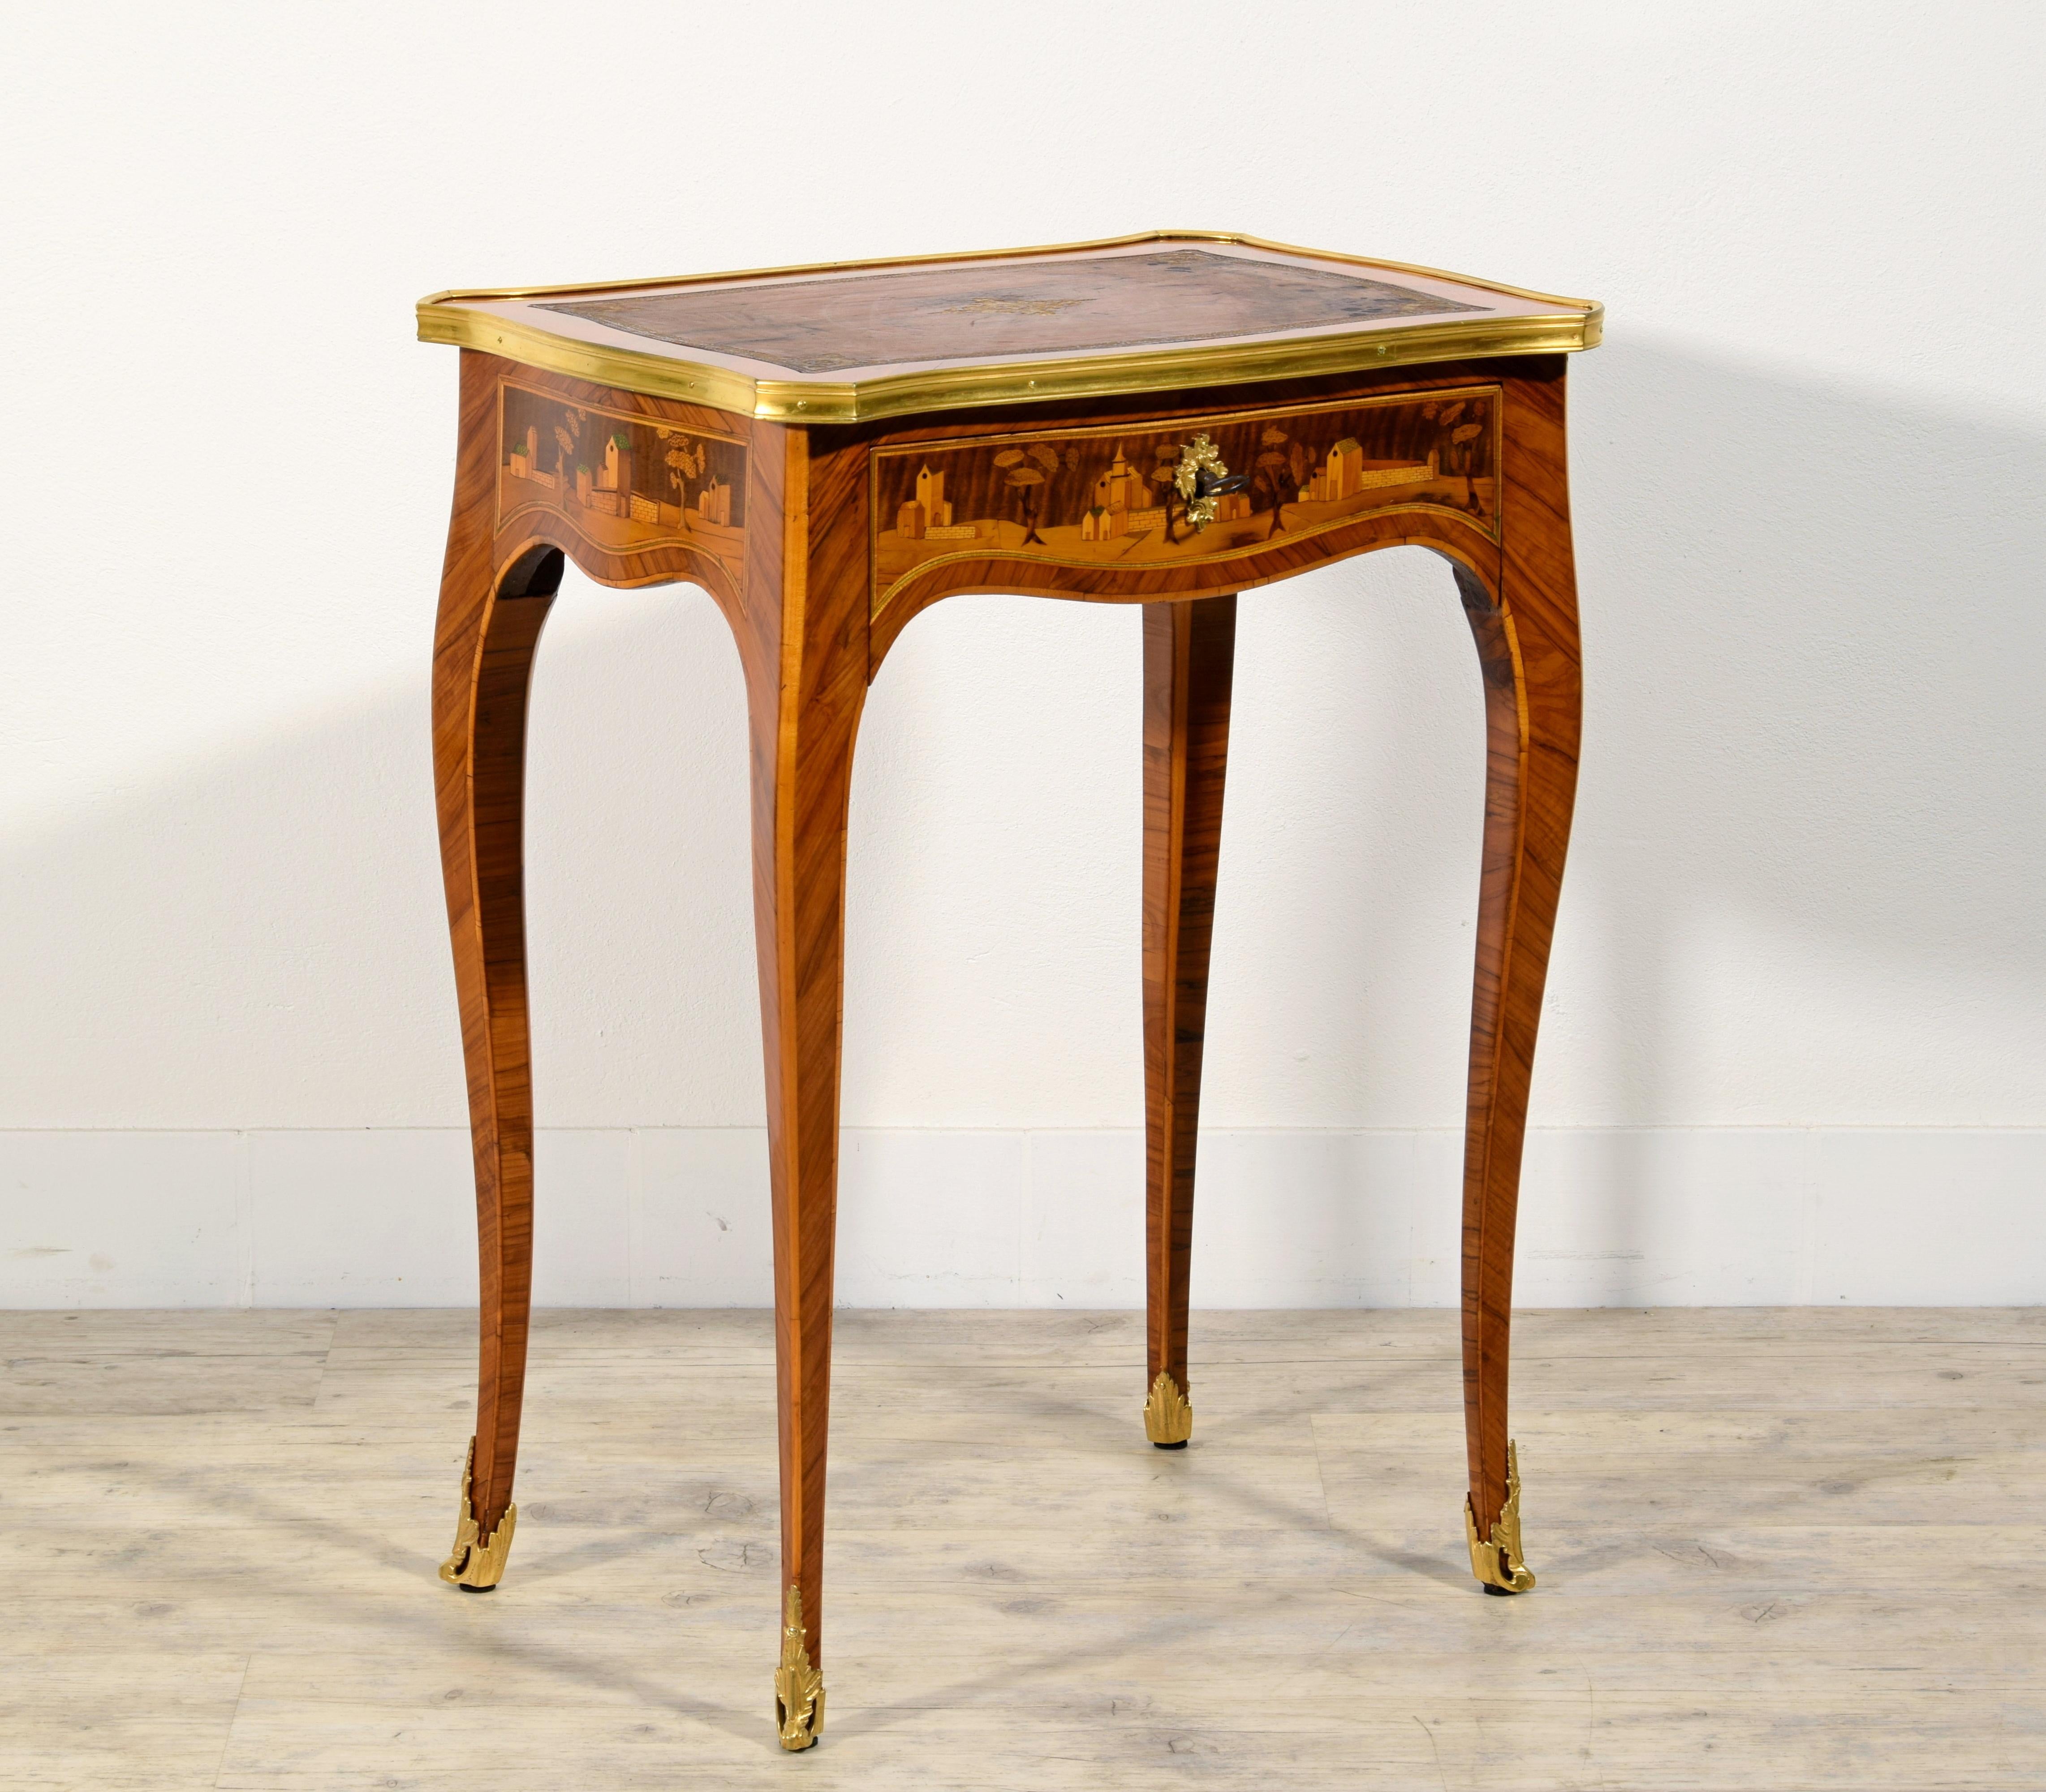 19th Century, France inlaid wood centre table 

This elegant centre table in inlaid wood was made in France in the early 19th century.
The rectangular top has shaped and wavy sides bordered by a gilded bronze lingotière. Veneered in wood,